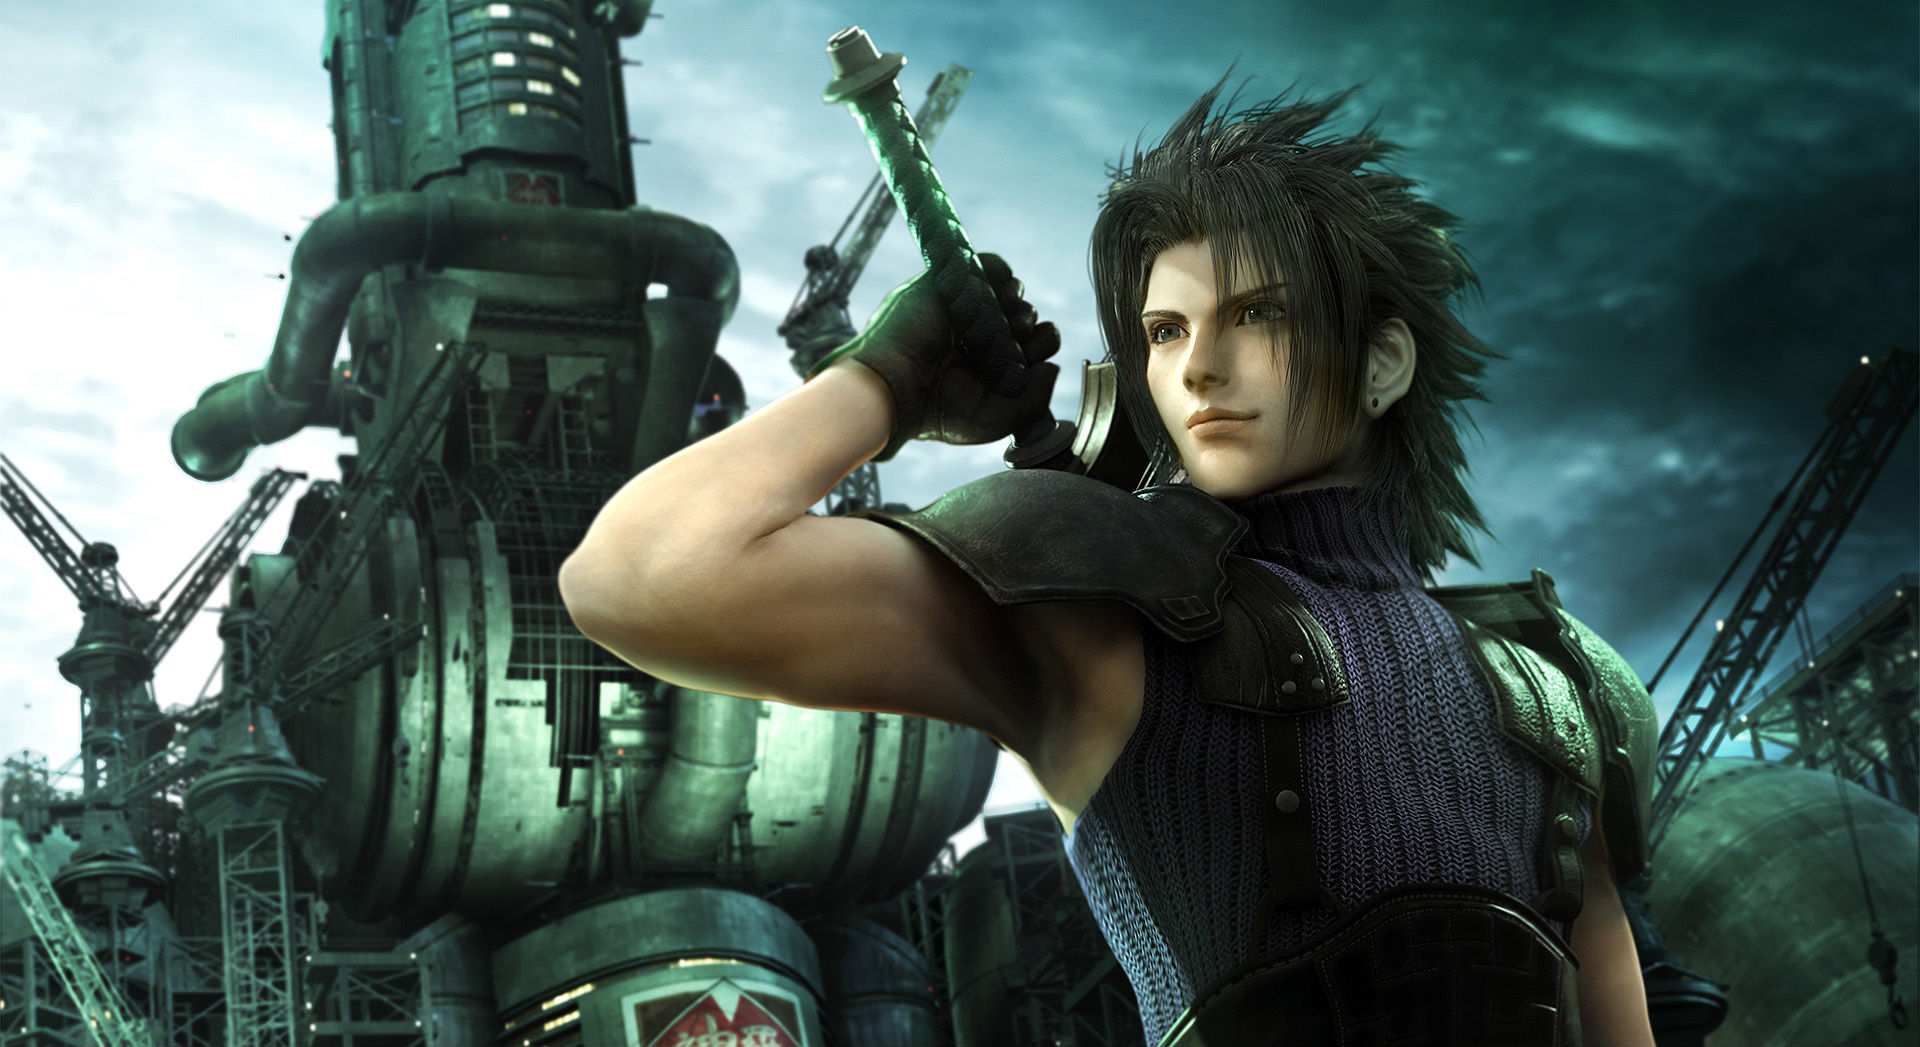 Zack Fair character from Final Fantasy VII: Crisis Core.